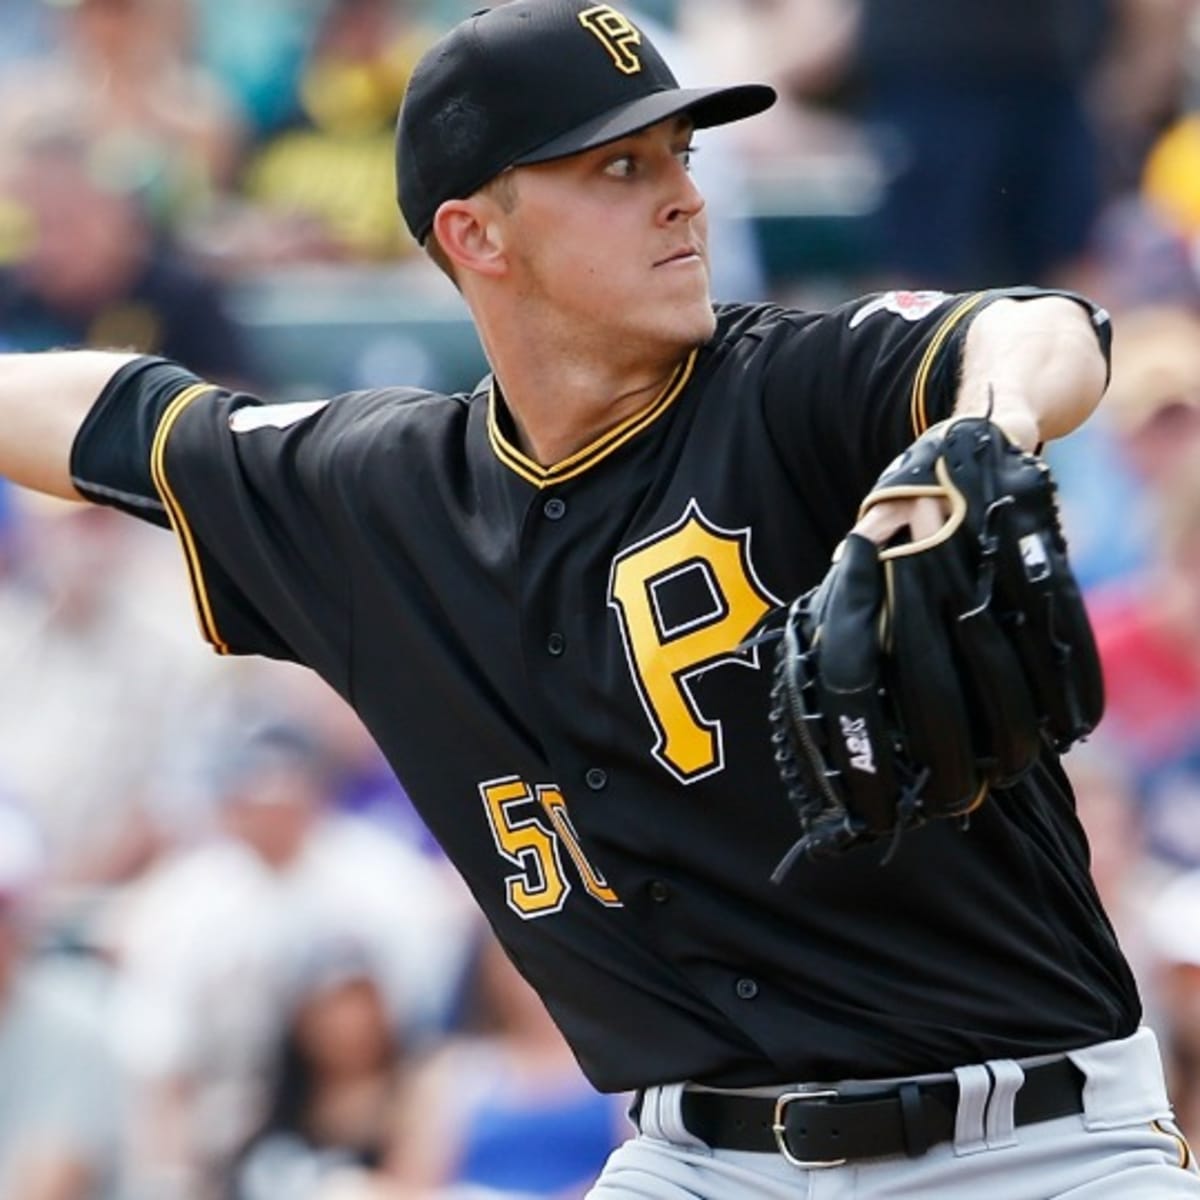 Yankees fans look to Jameson Taillon as starter in playoff